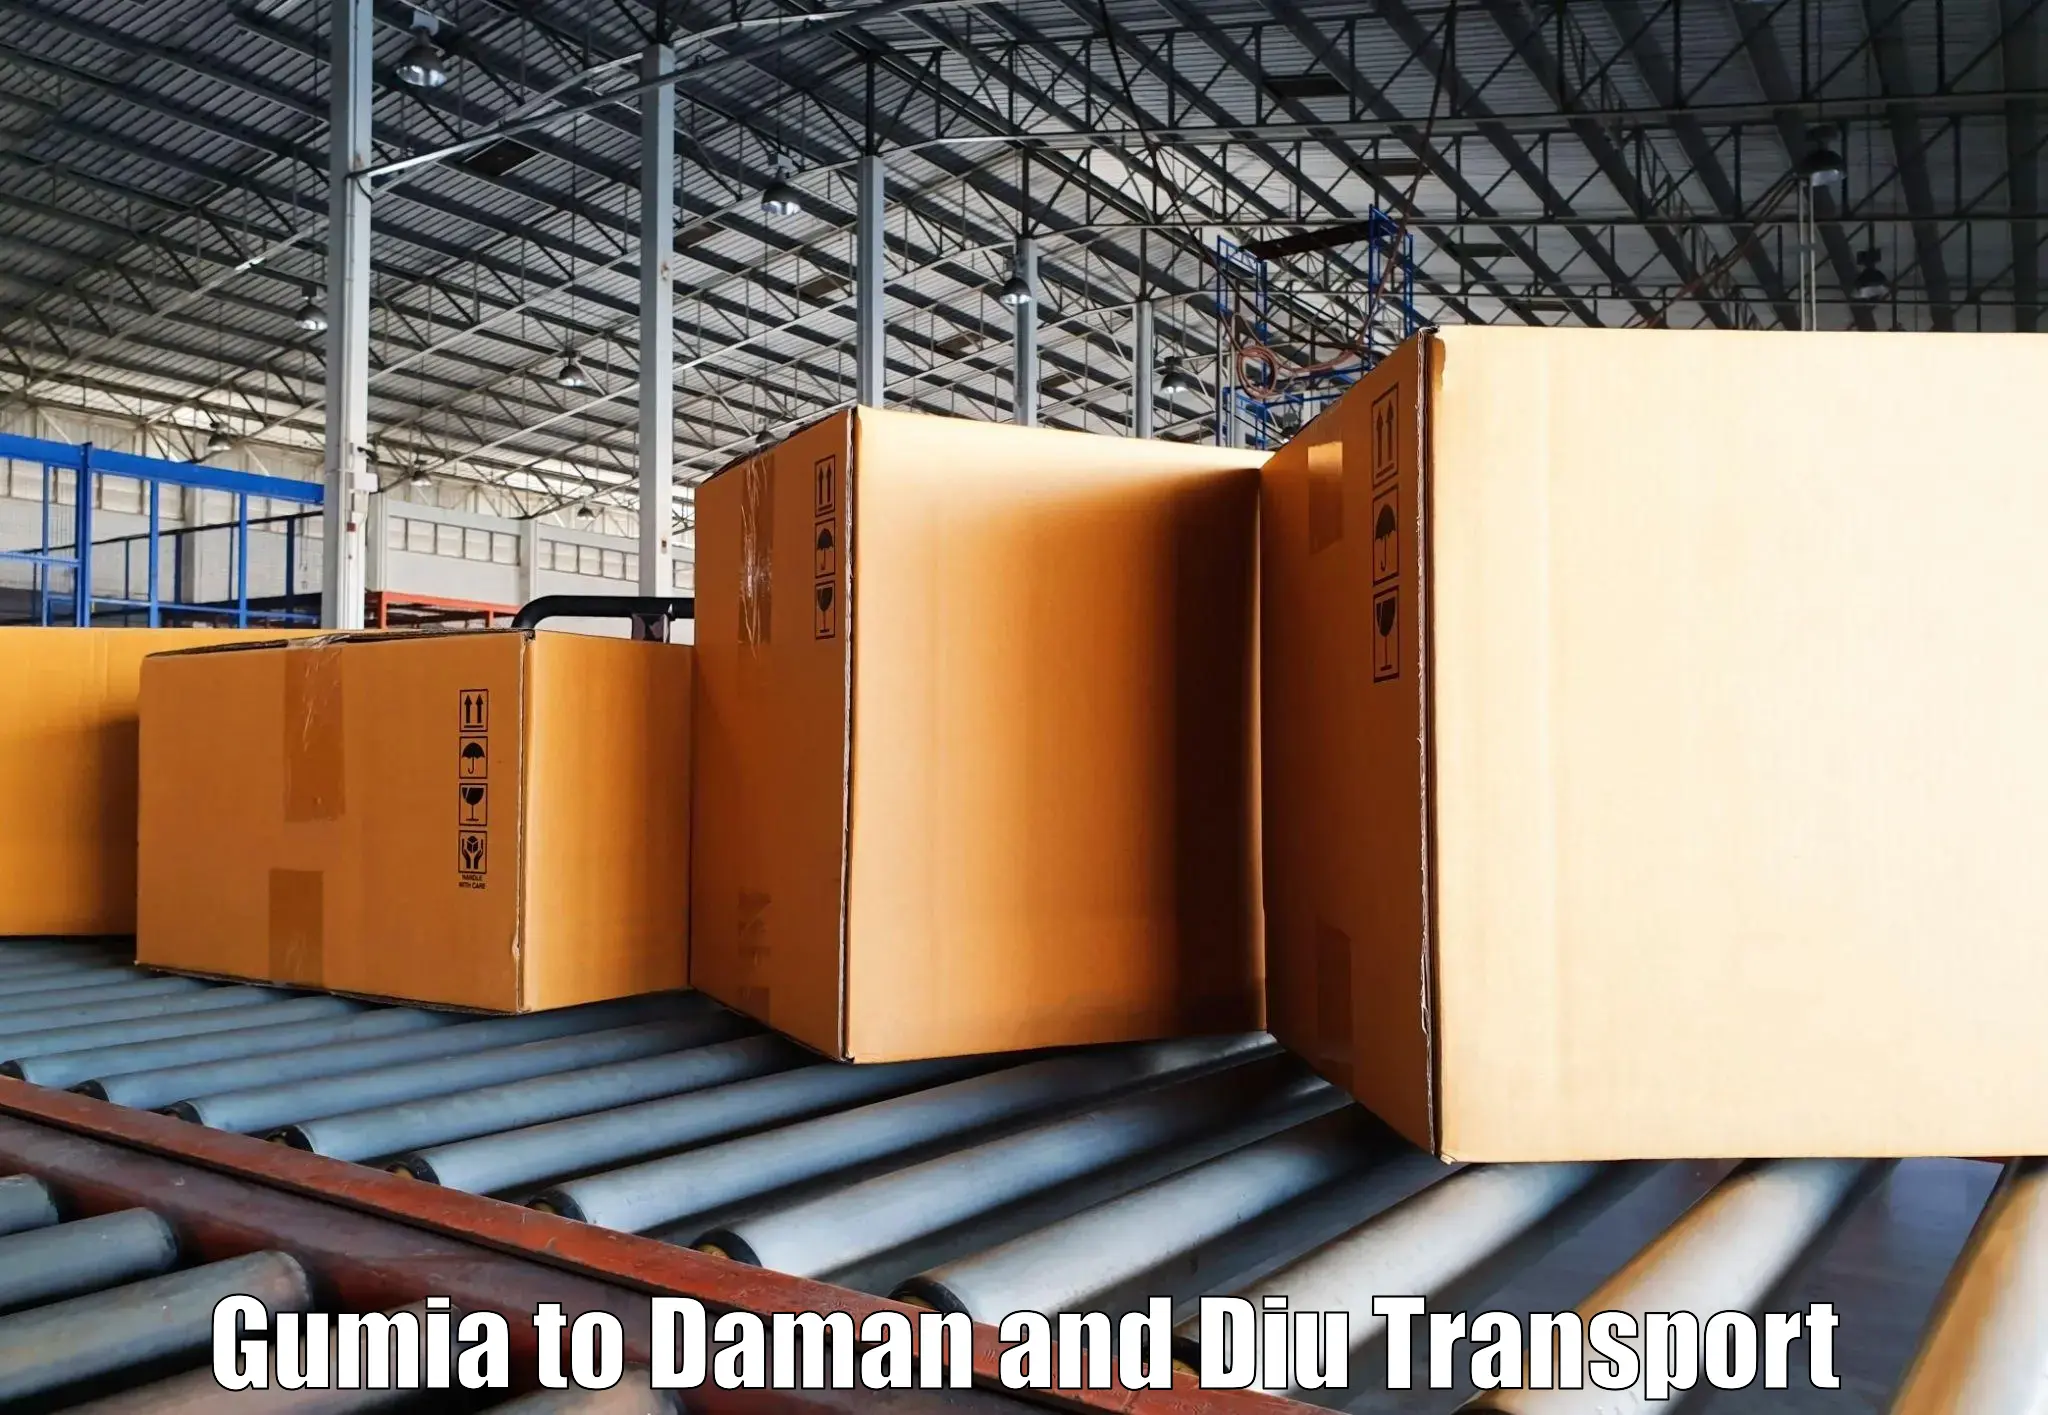 Vehicle transport services Gumia to Daman and Diu